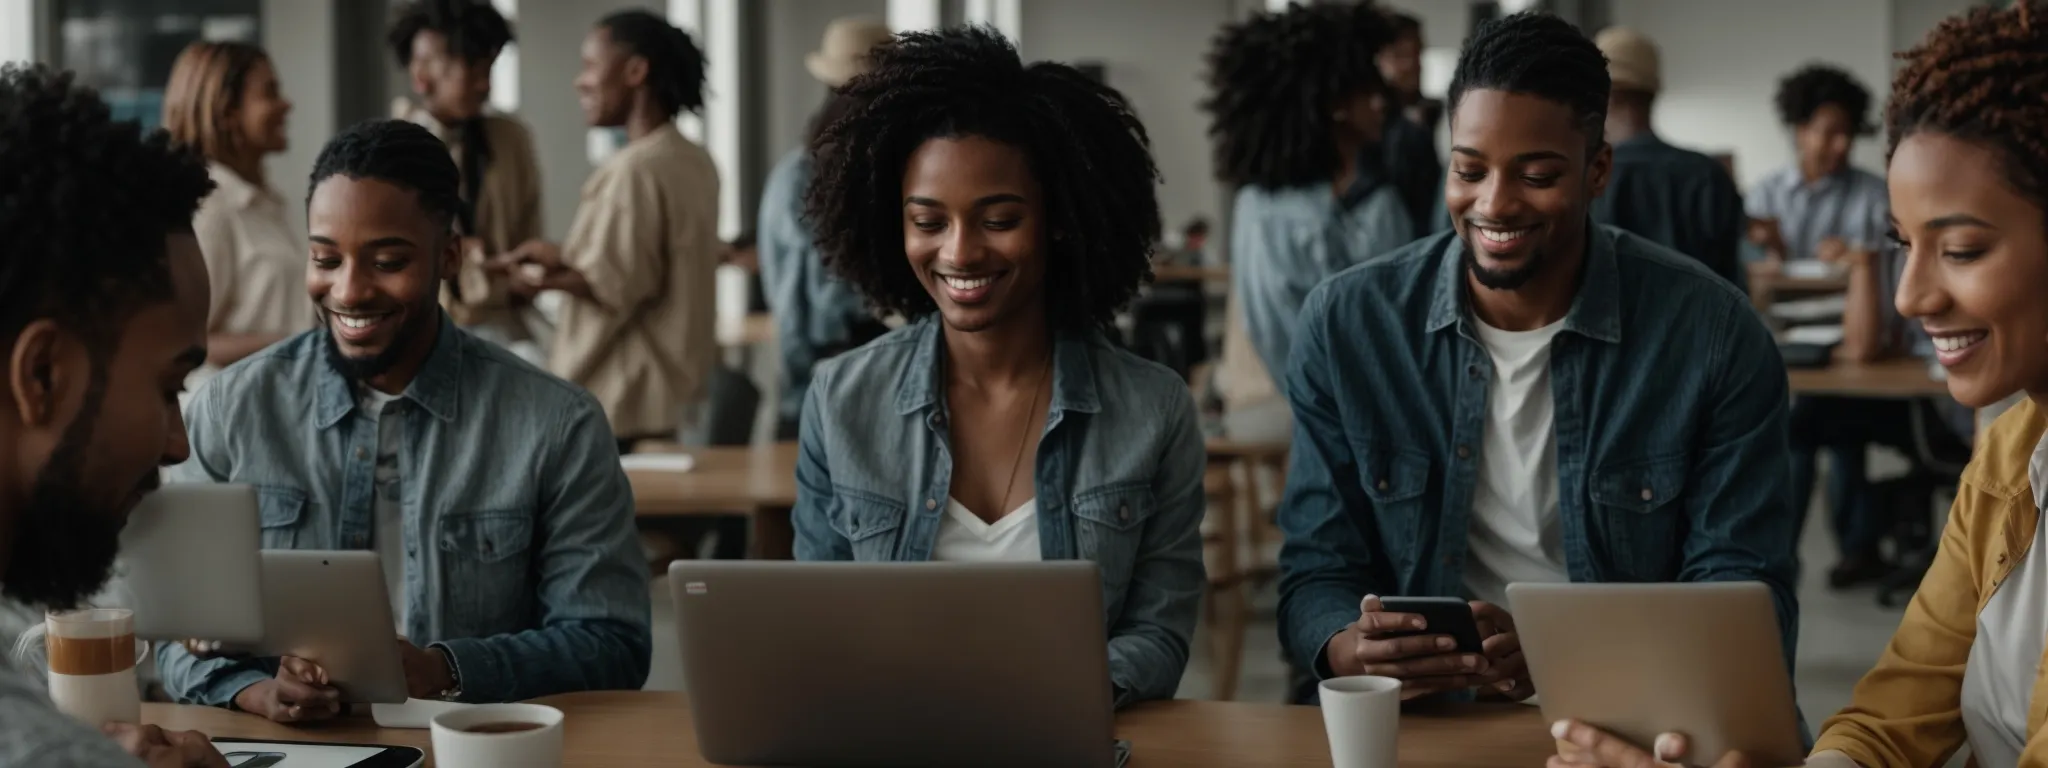 a diverse group of smiling people in casual clothing using various tech devices in a bright, open-concept office space, actively discussing and sharing their user experiences.